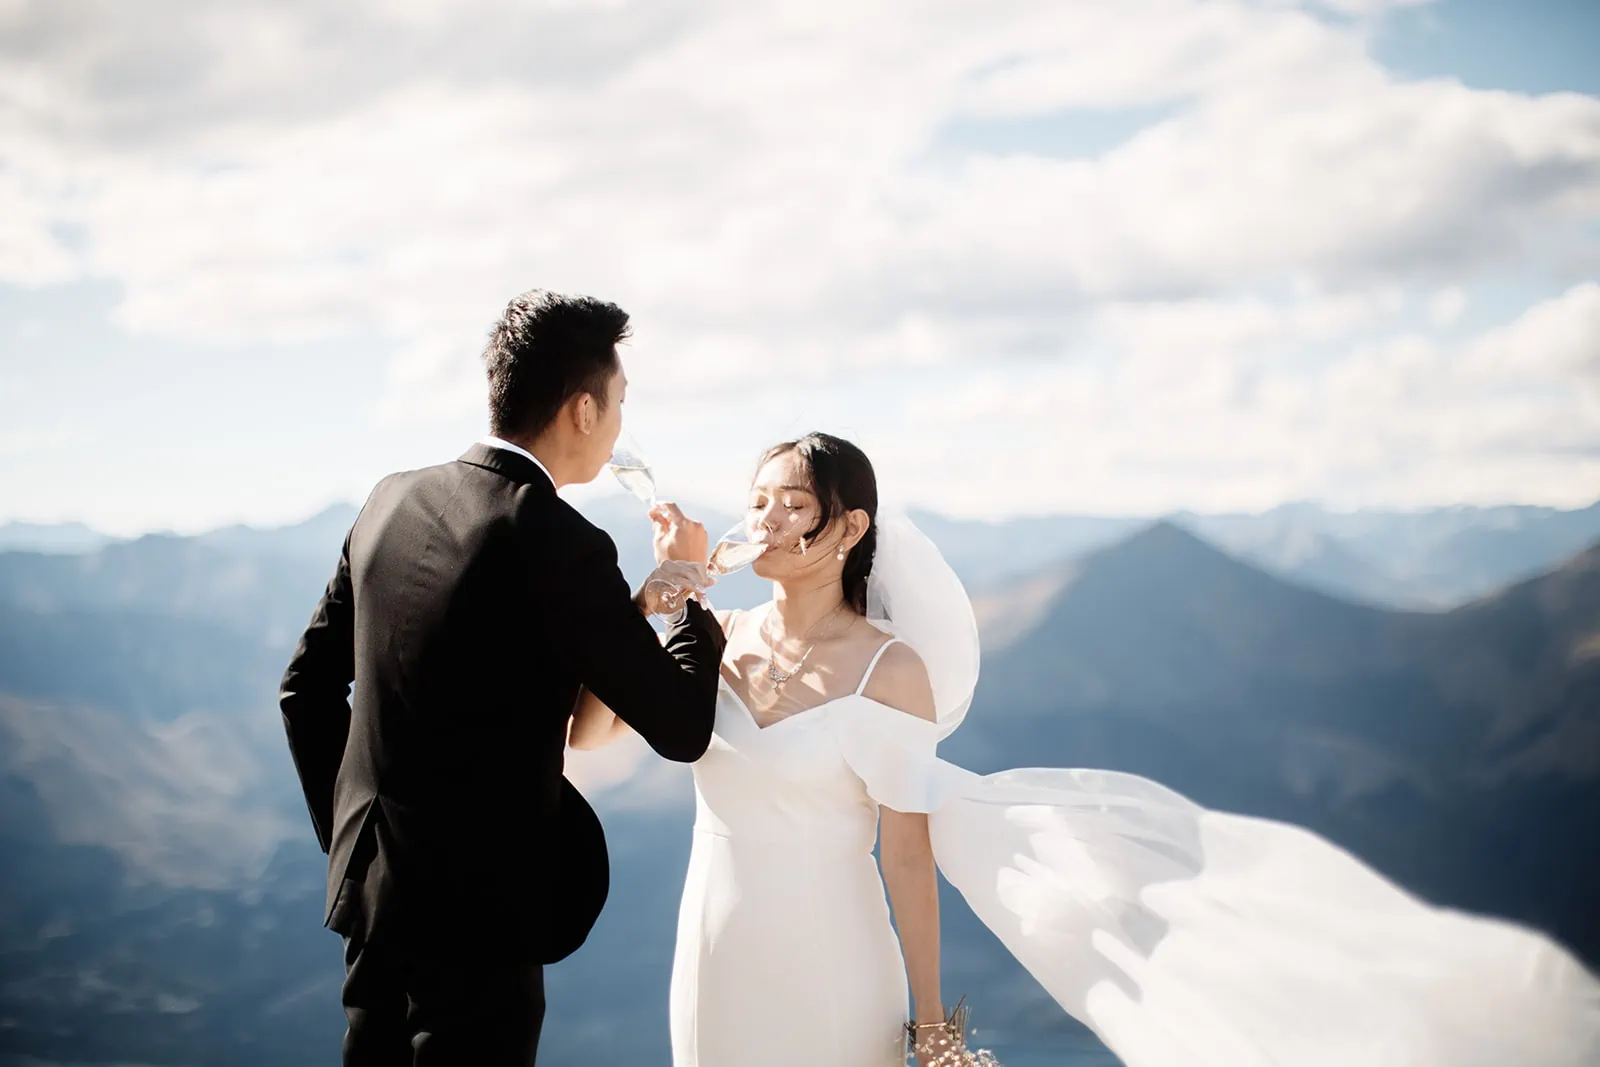 A scenic pre-wedding photoshoot featuring Dios and Carlyn atop Cecil Peak in Queenstown, where they joyfully feed each other cake.